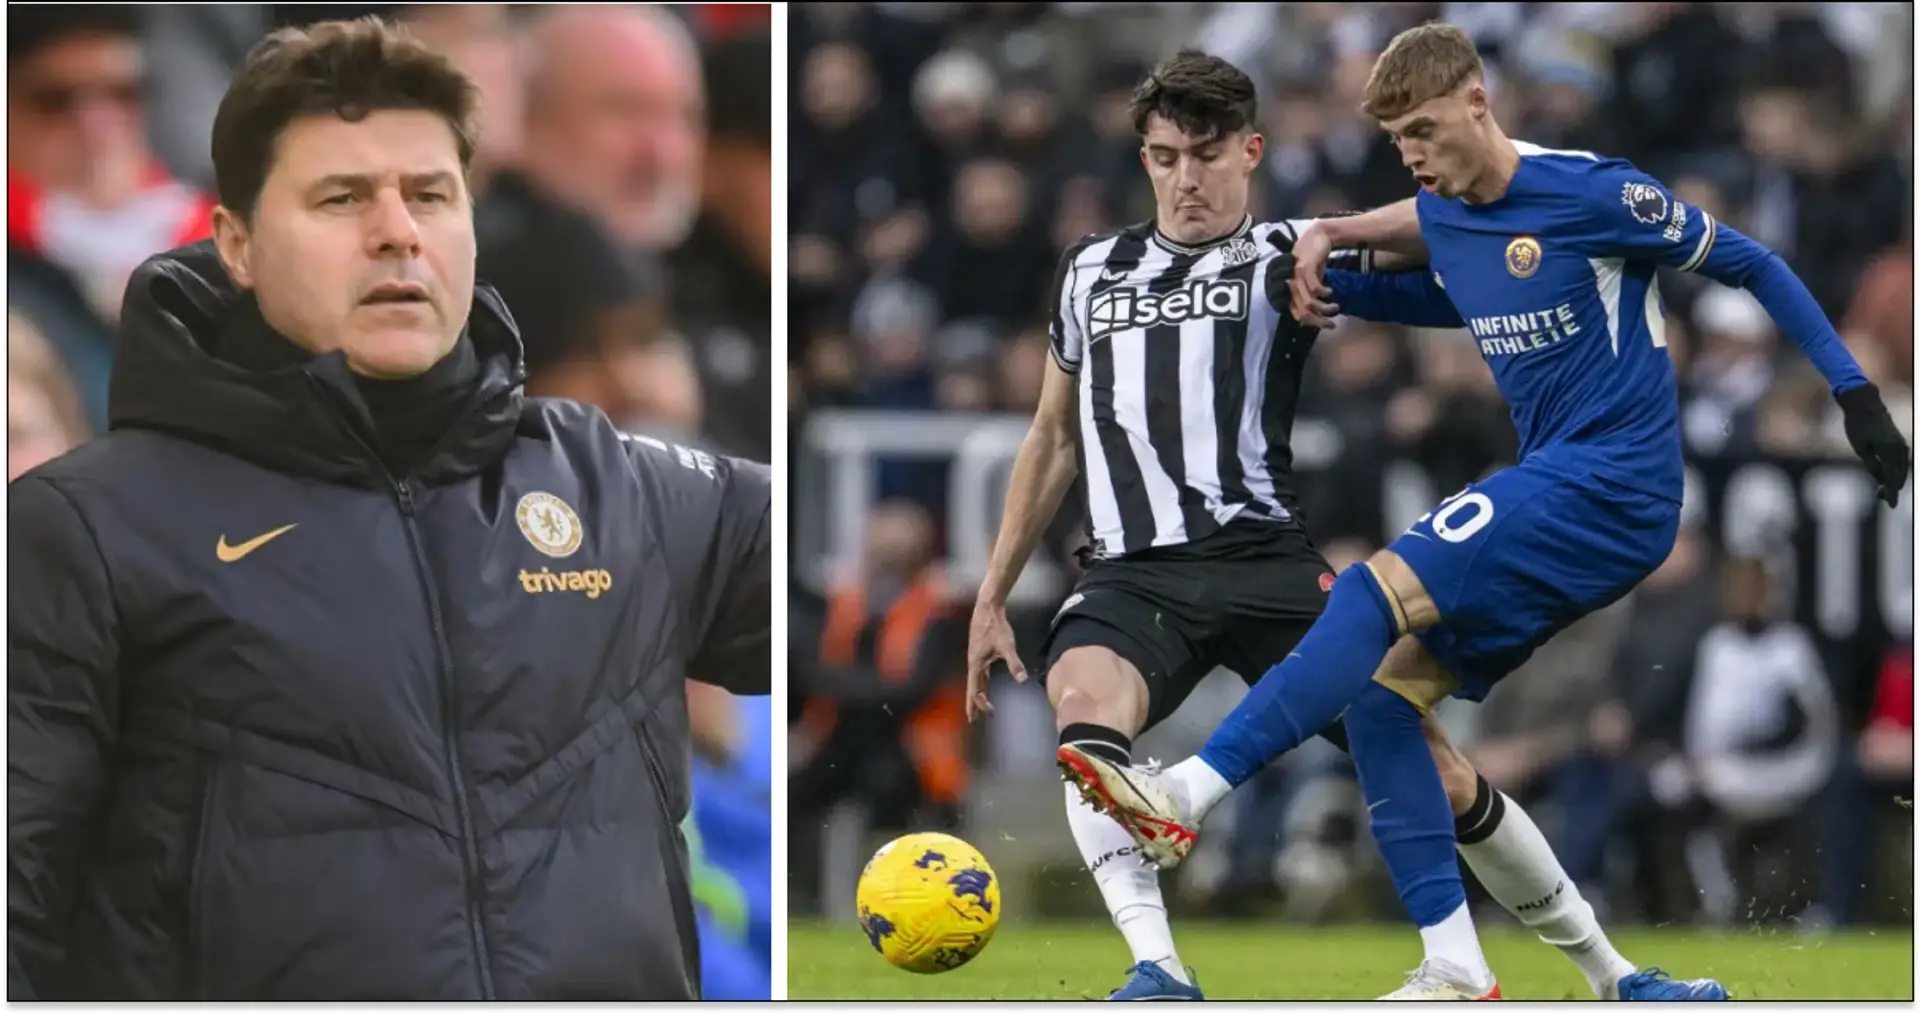 What would have been a fair result in Chelsea v Newcastle?